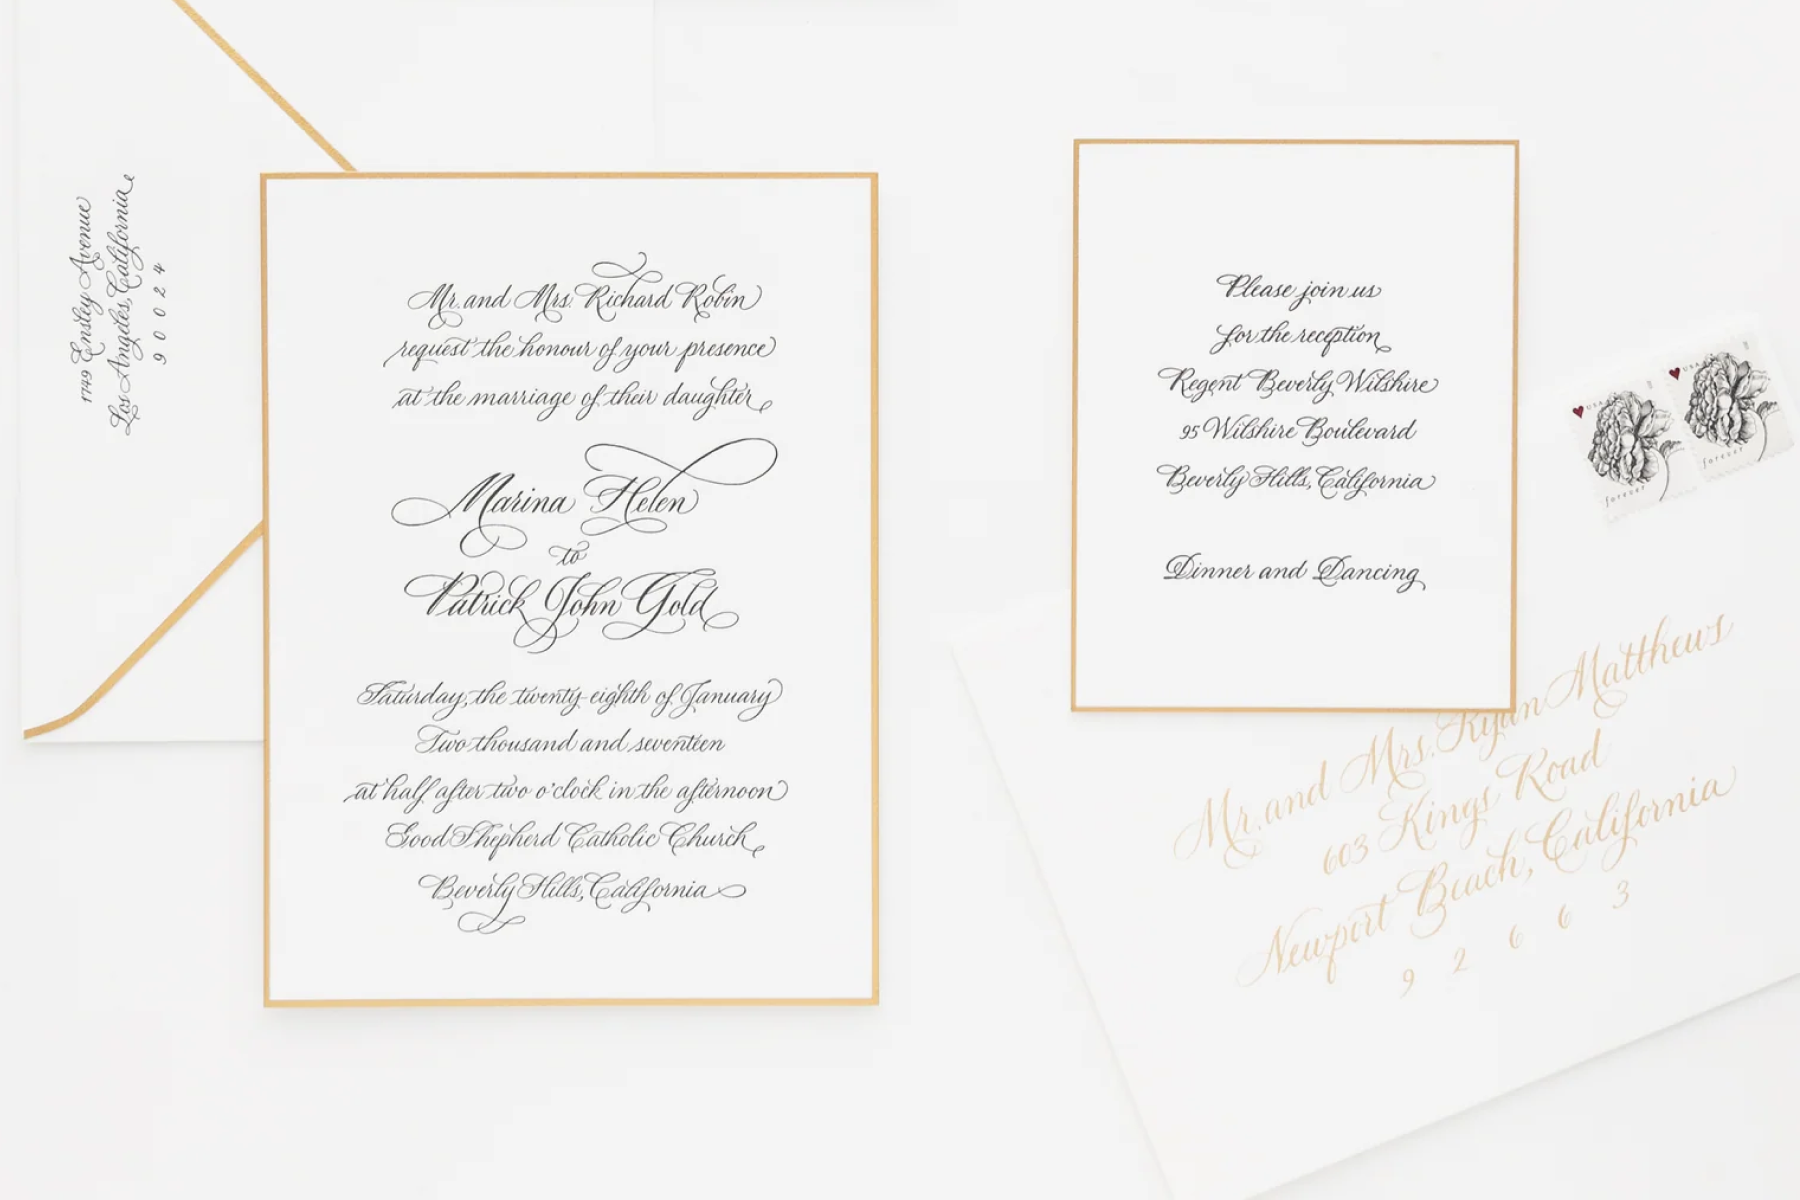 A wedding invitation suite with the details in cursive font and simple gold border.